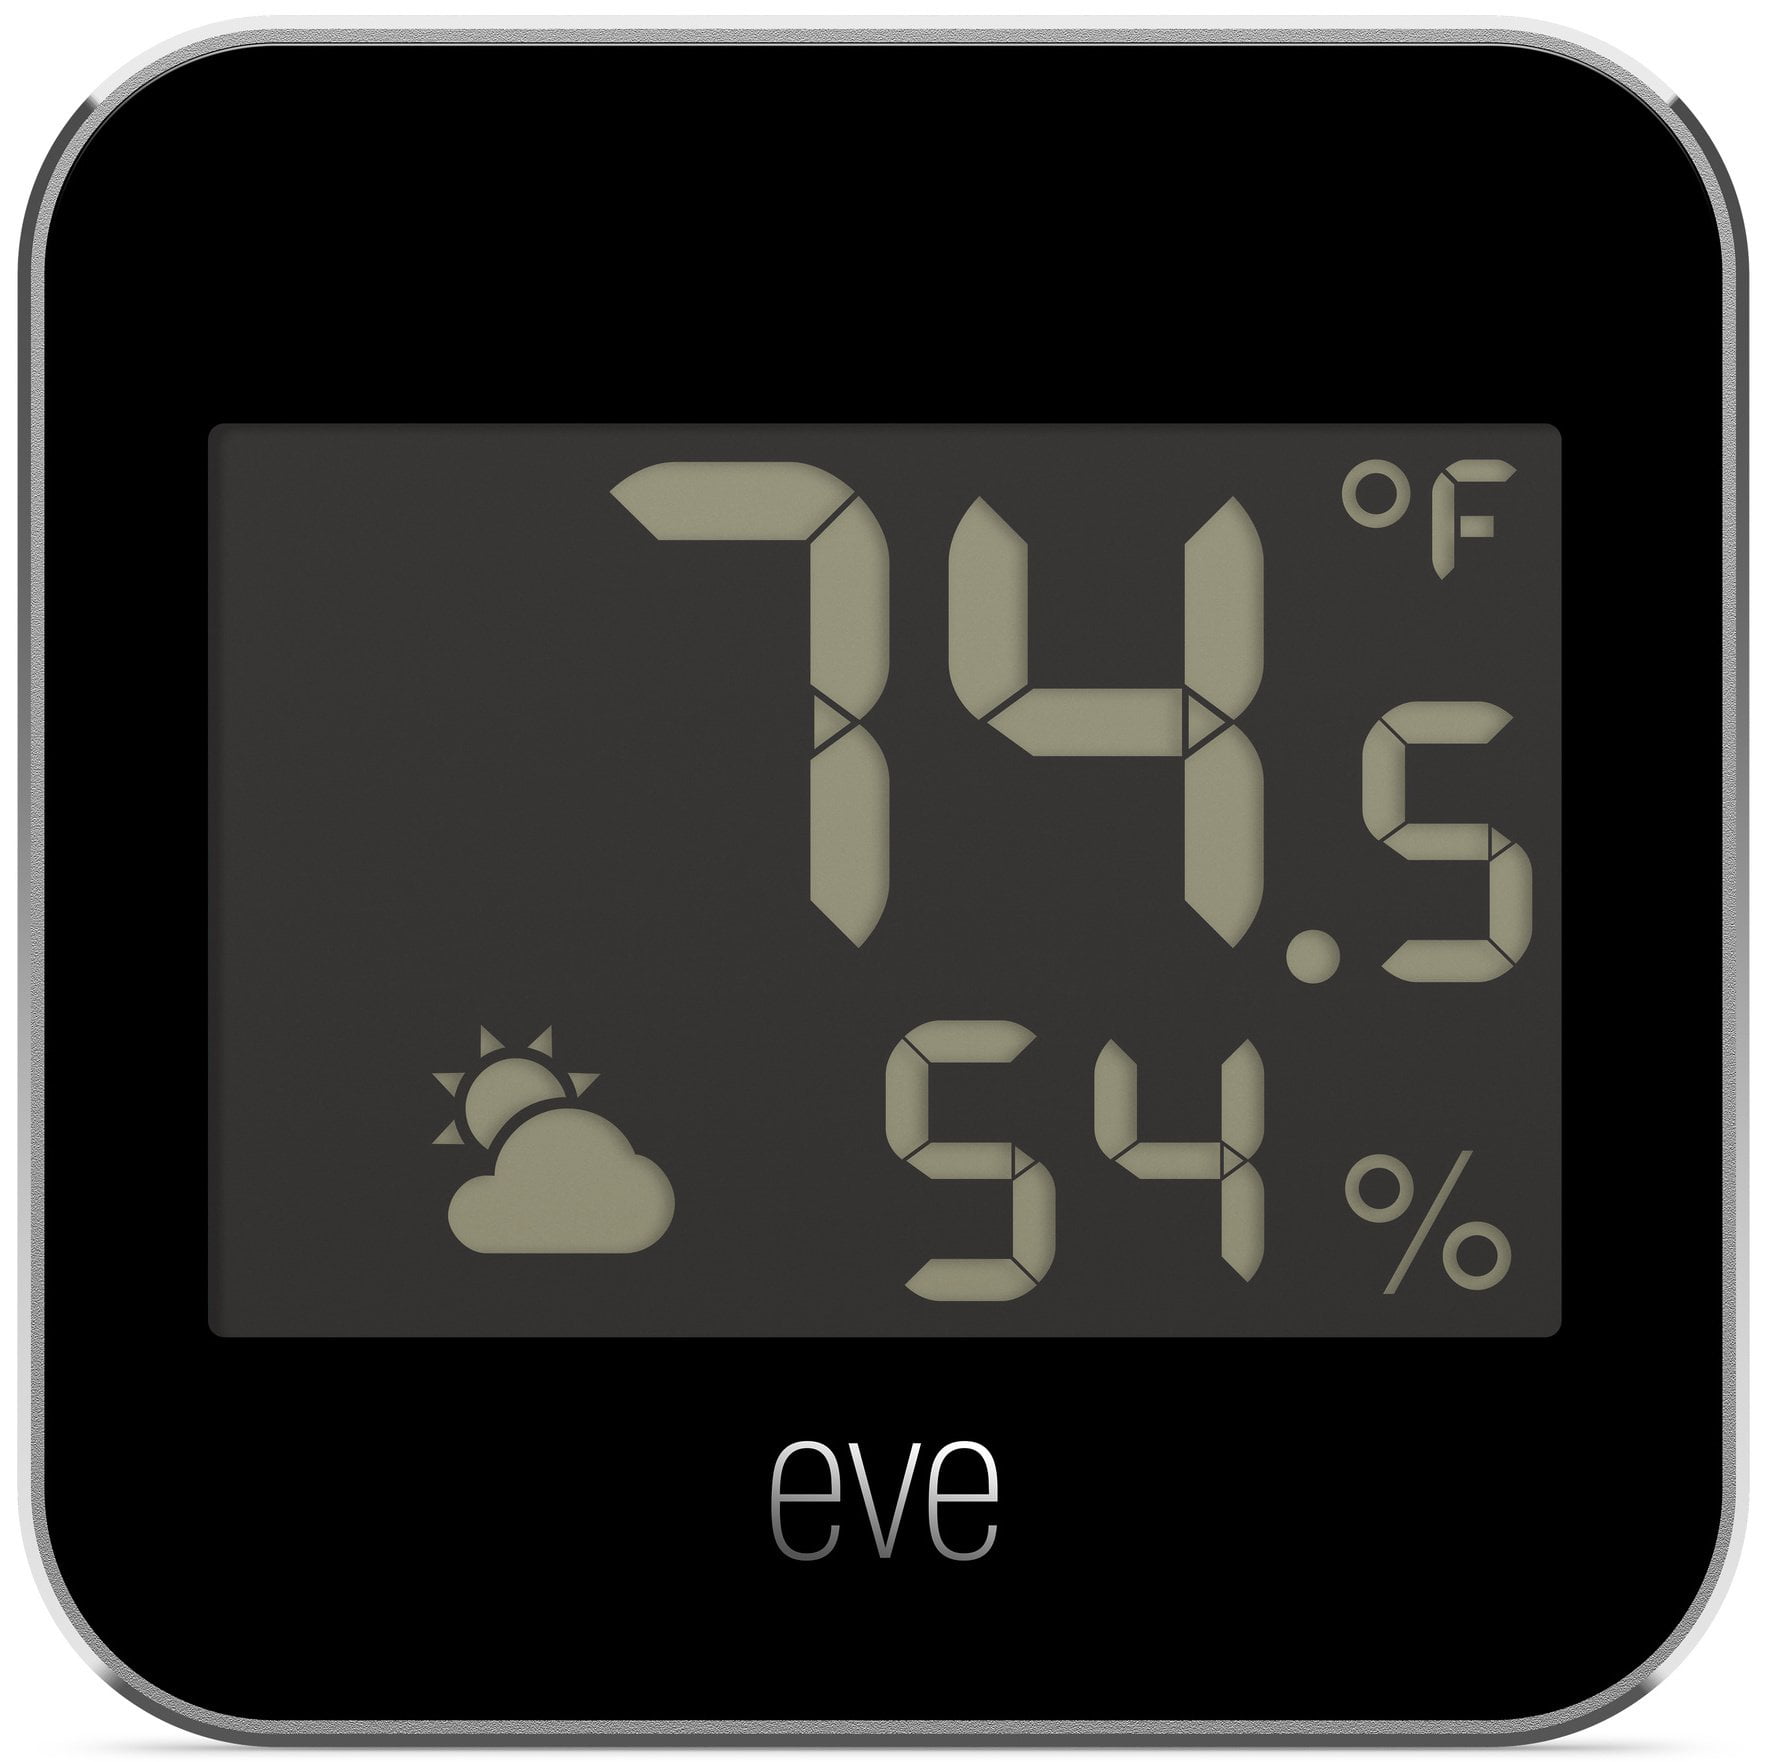 Weather station connected to Eve weather